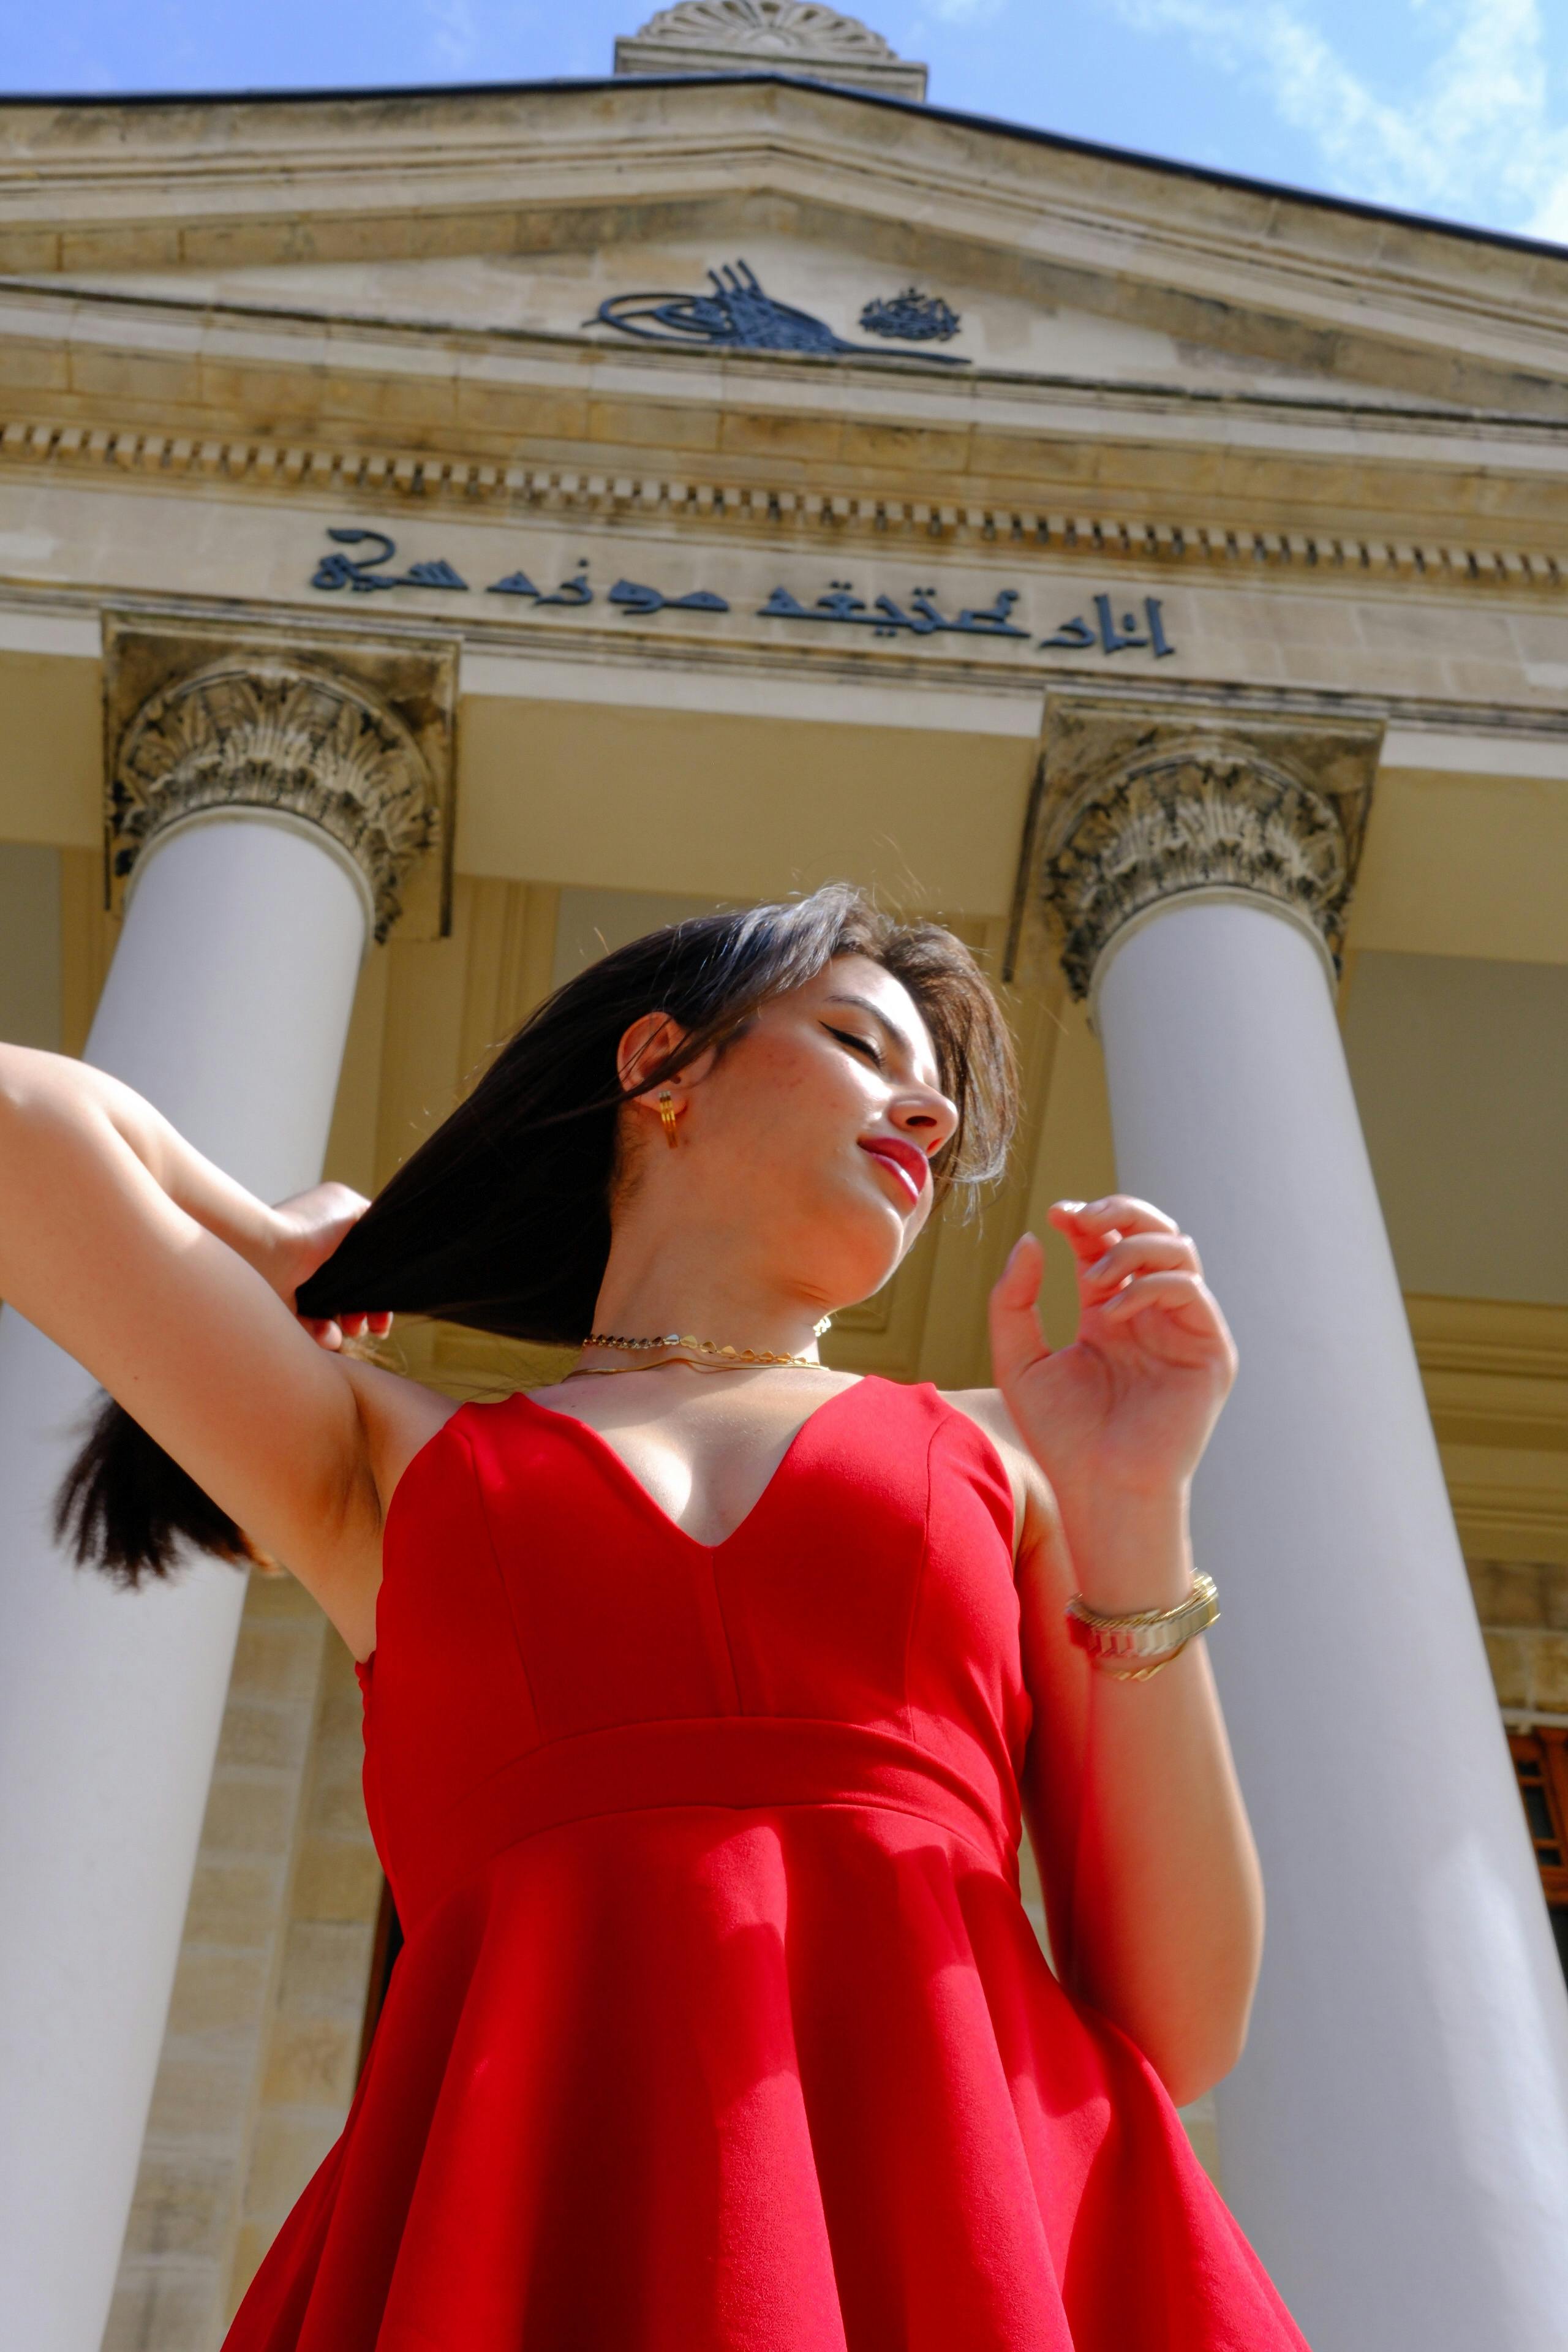 Woman in Red Dress Posing under Building with Arabic Writing and